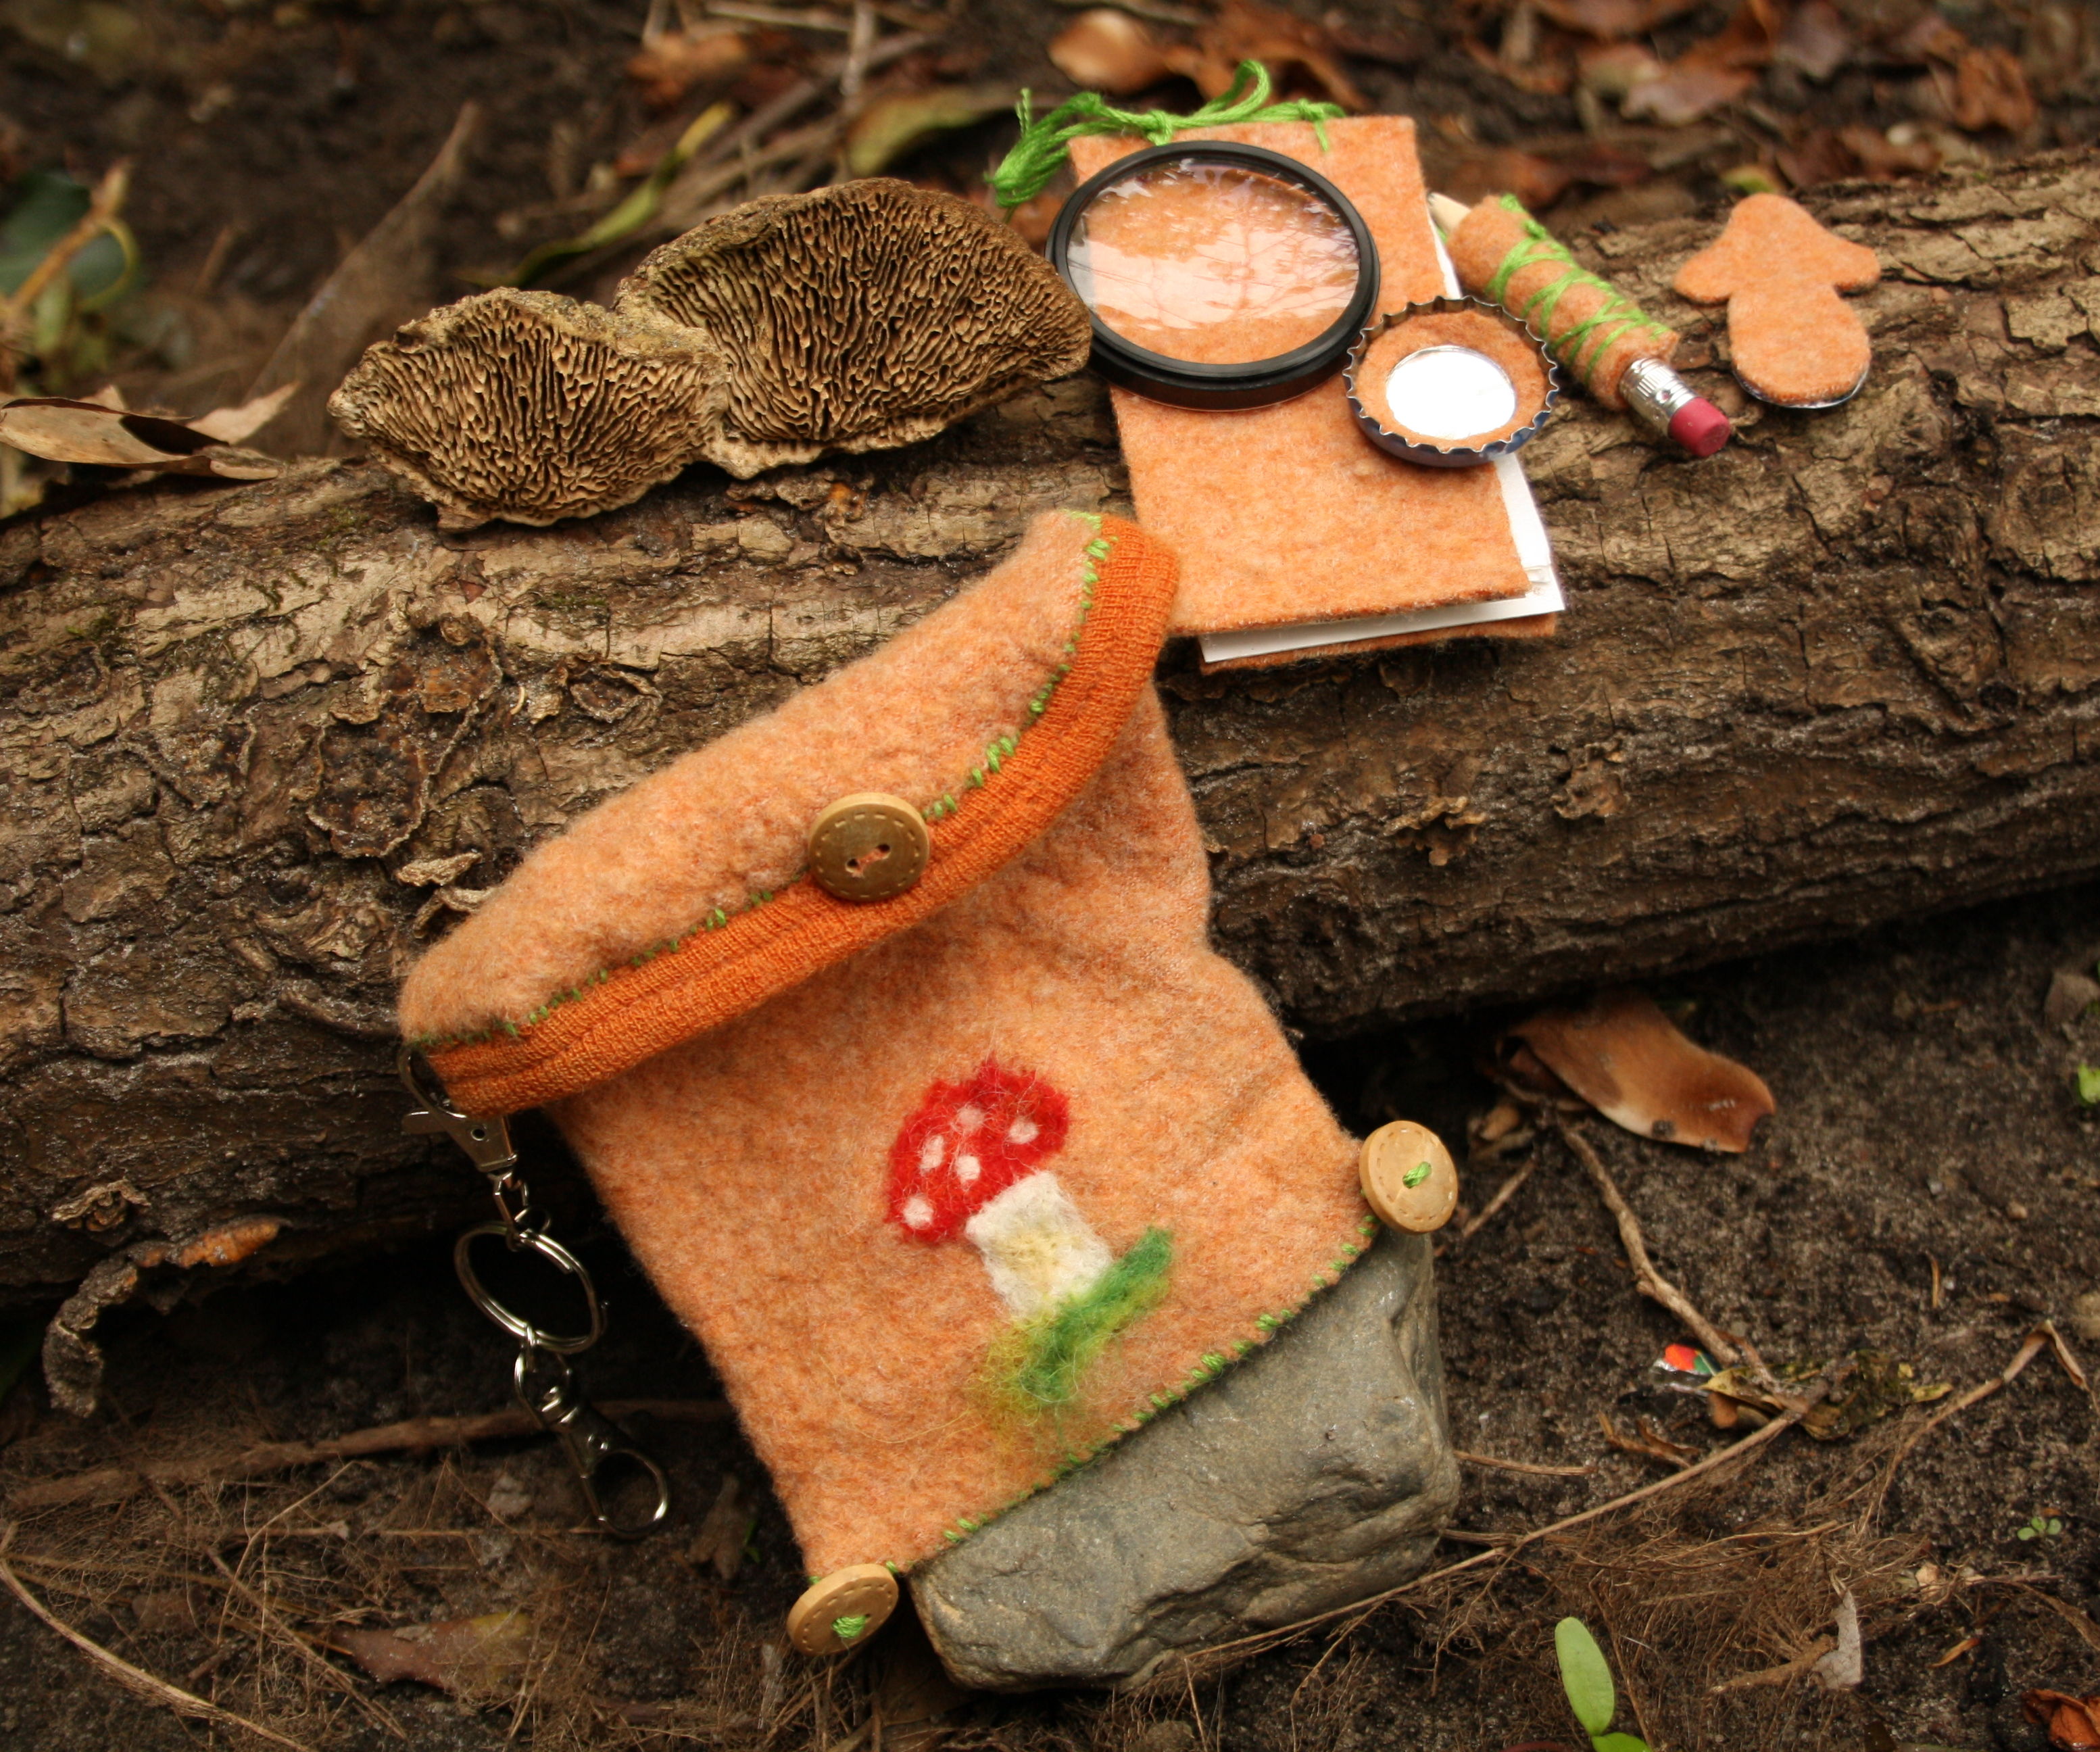 Mushroom Determination Kit, Pocket Sized and Made From Scrap